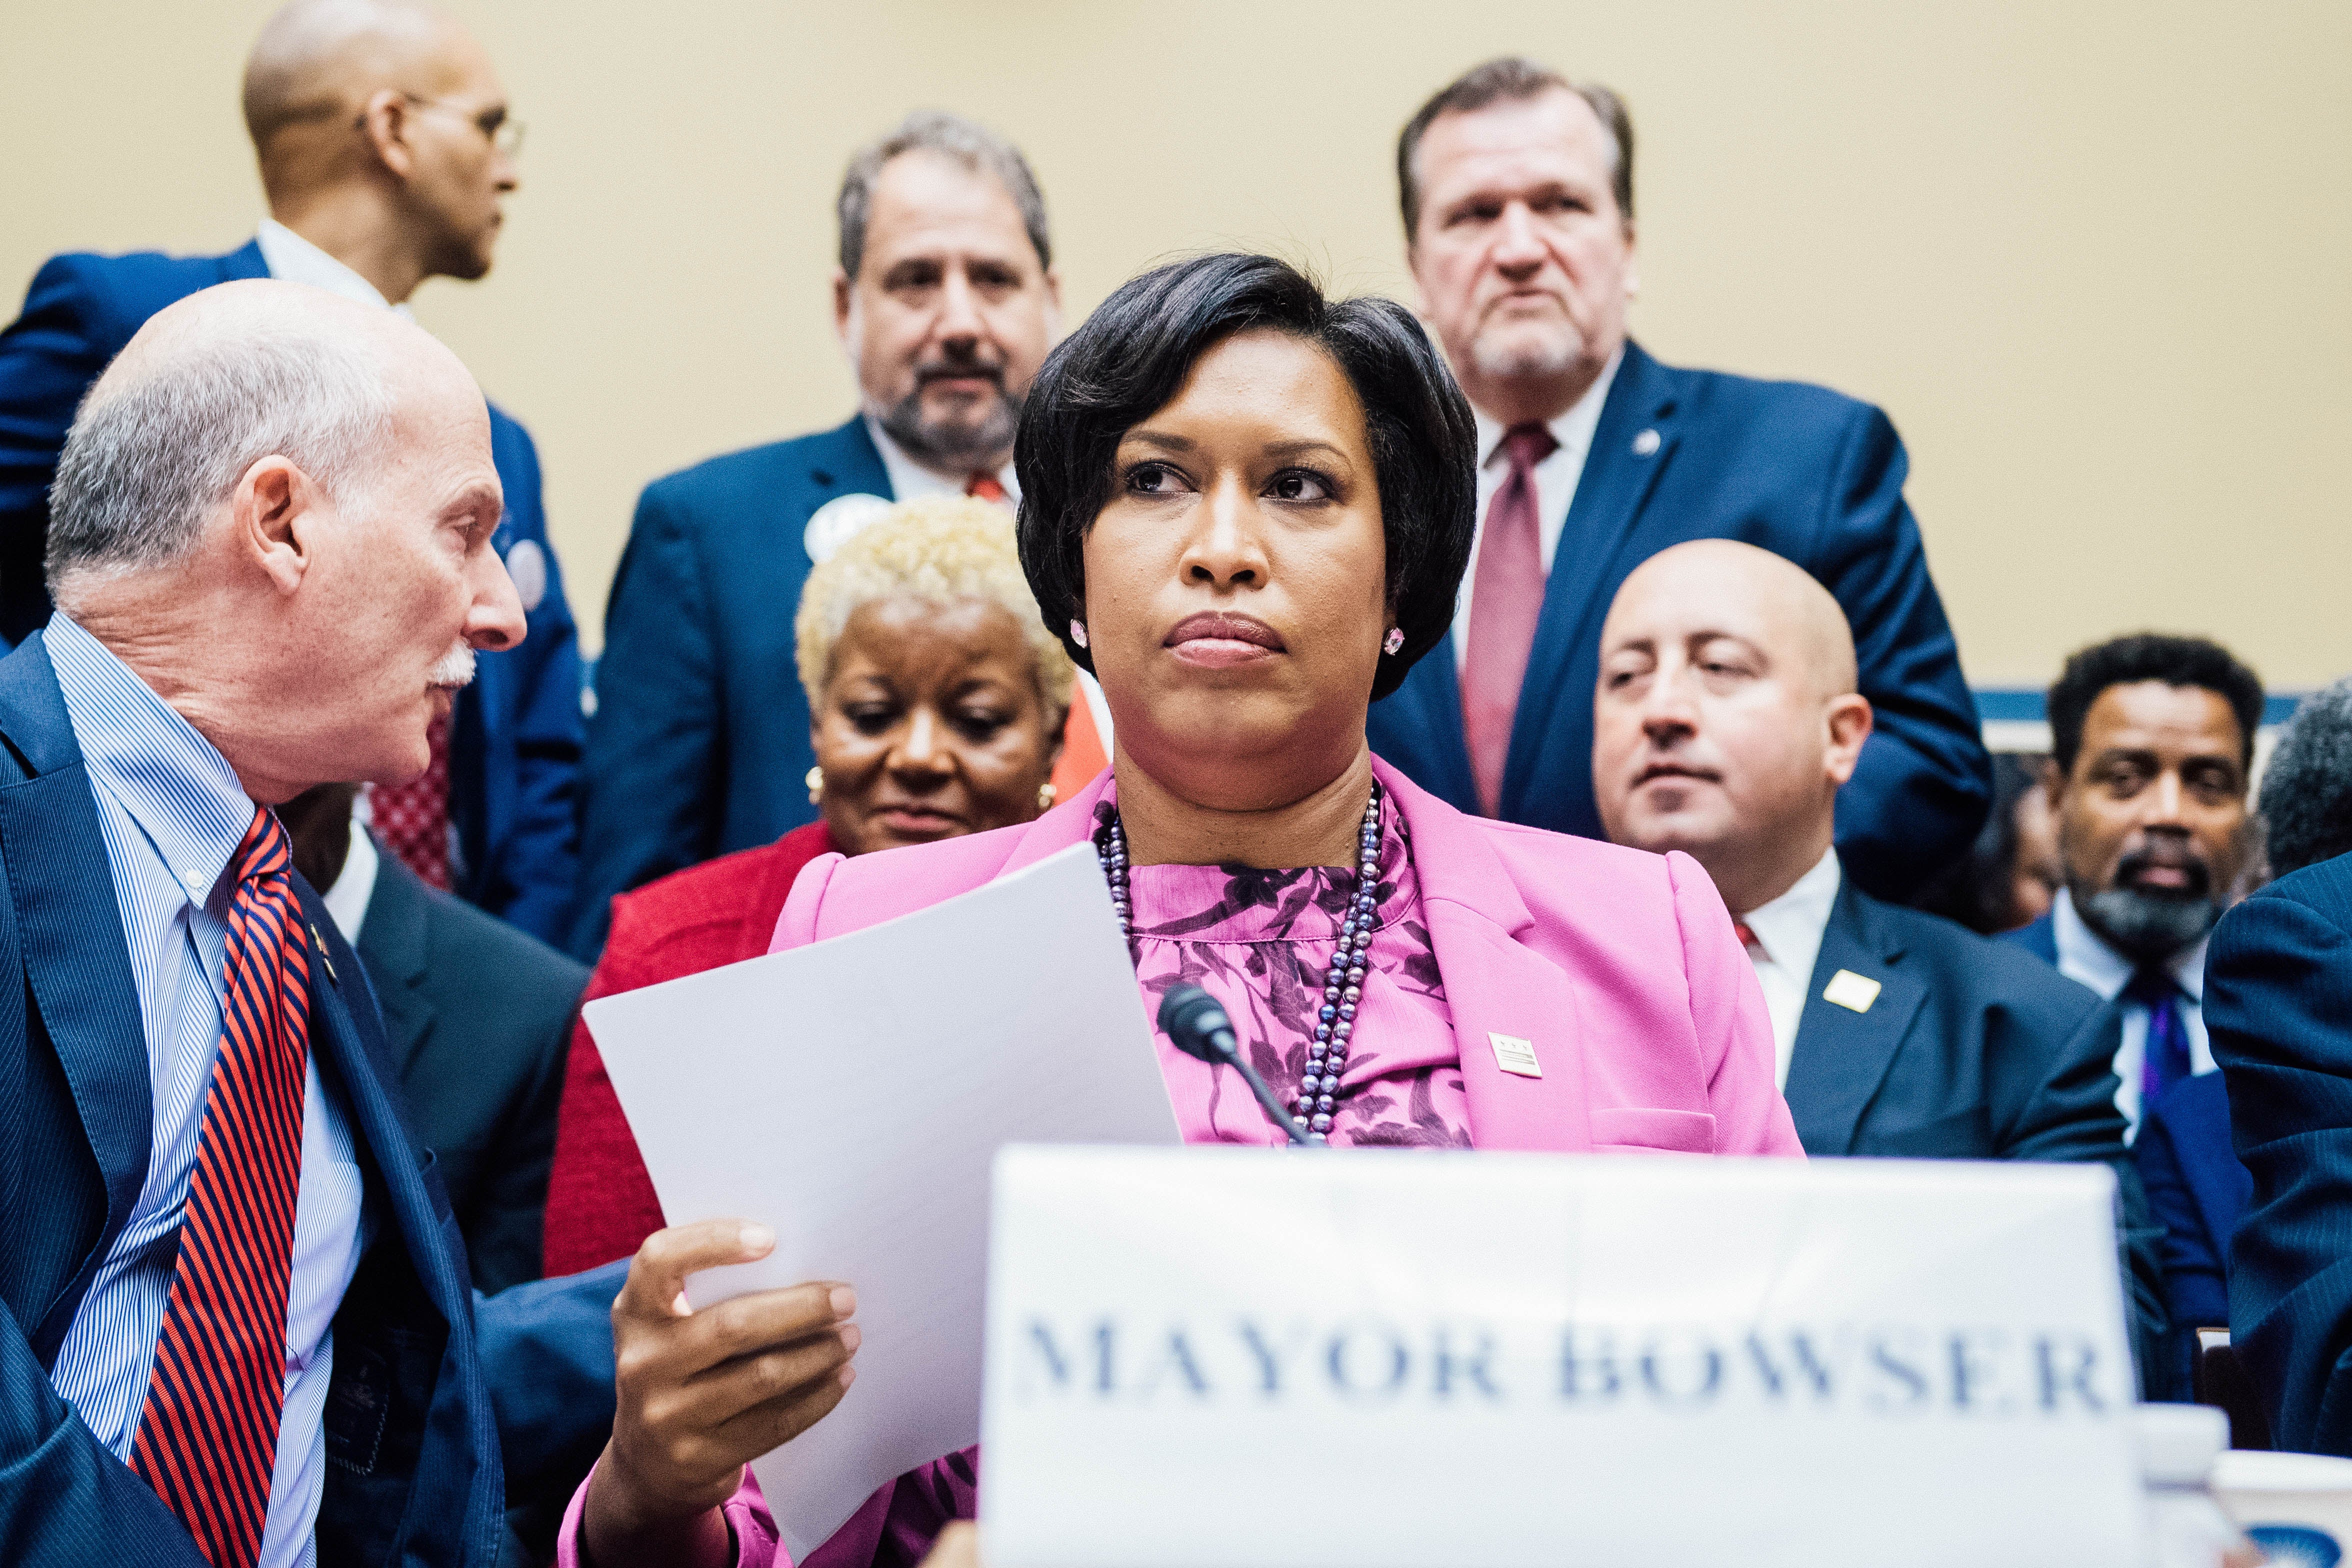 Mendelson turns backward in his seat toward other people at the hearing. Next to him, Bowser holds a piece of paper and sits behind a placard that reads "MAYOR BOWSER."